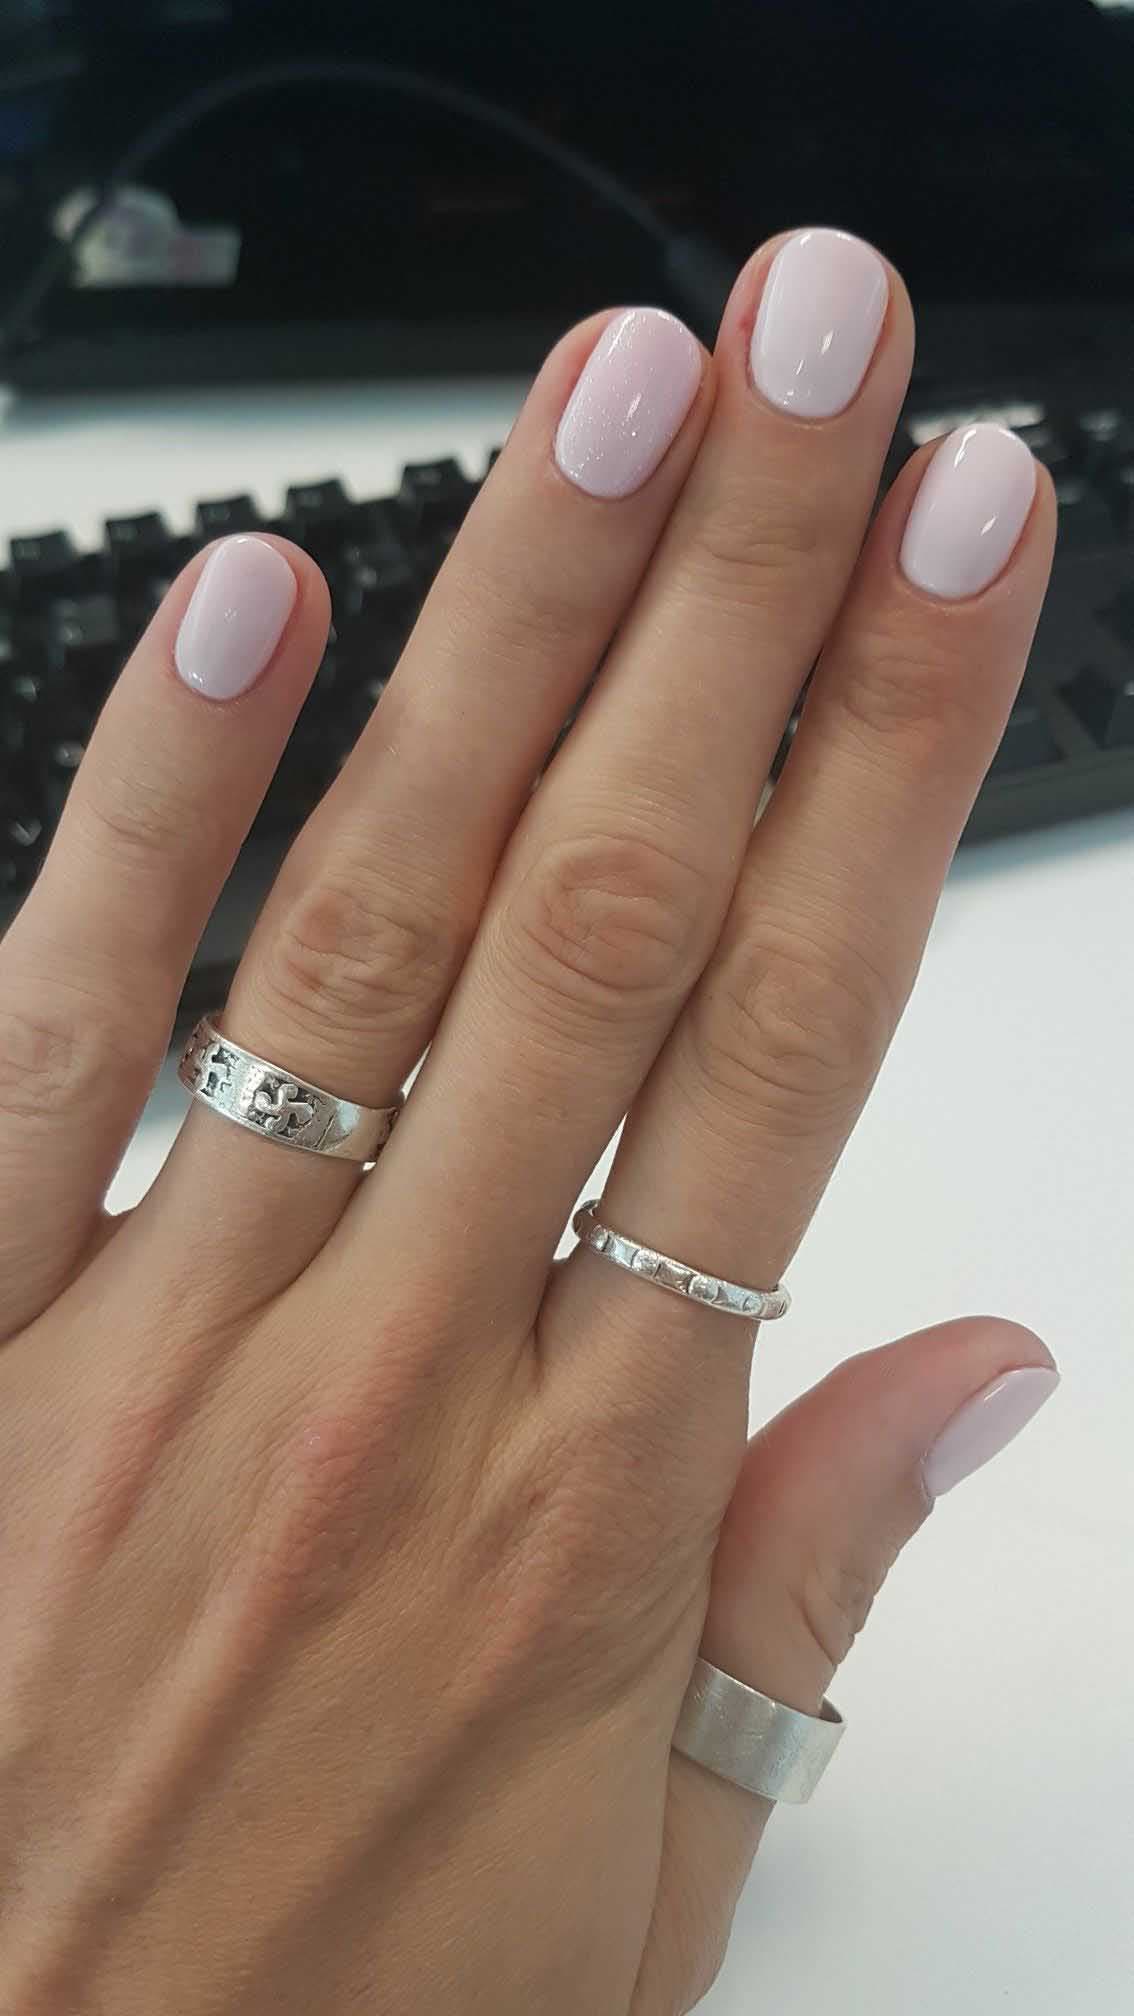 Des ongles ronds nude